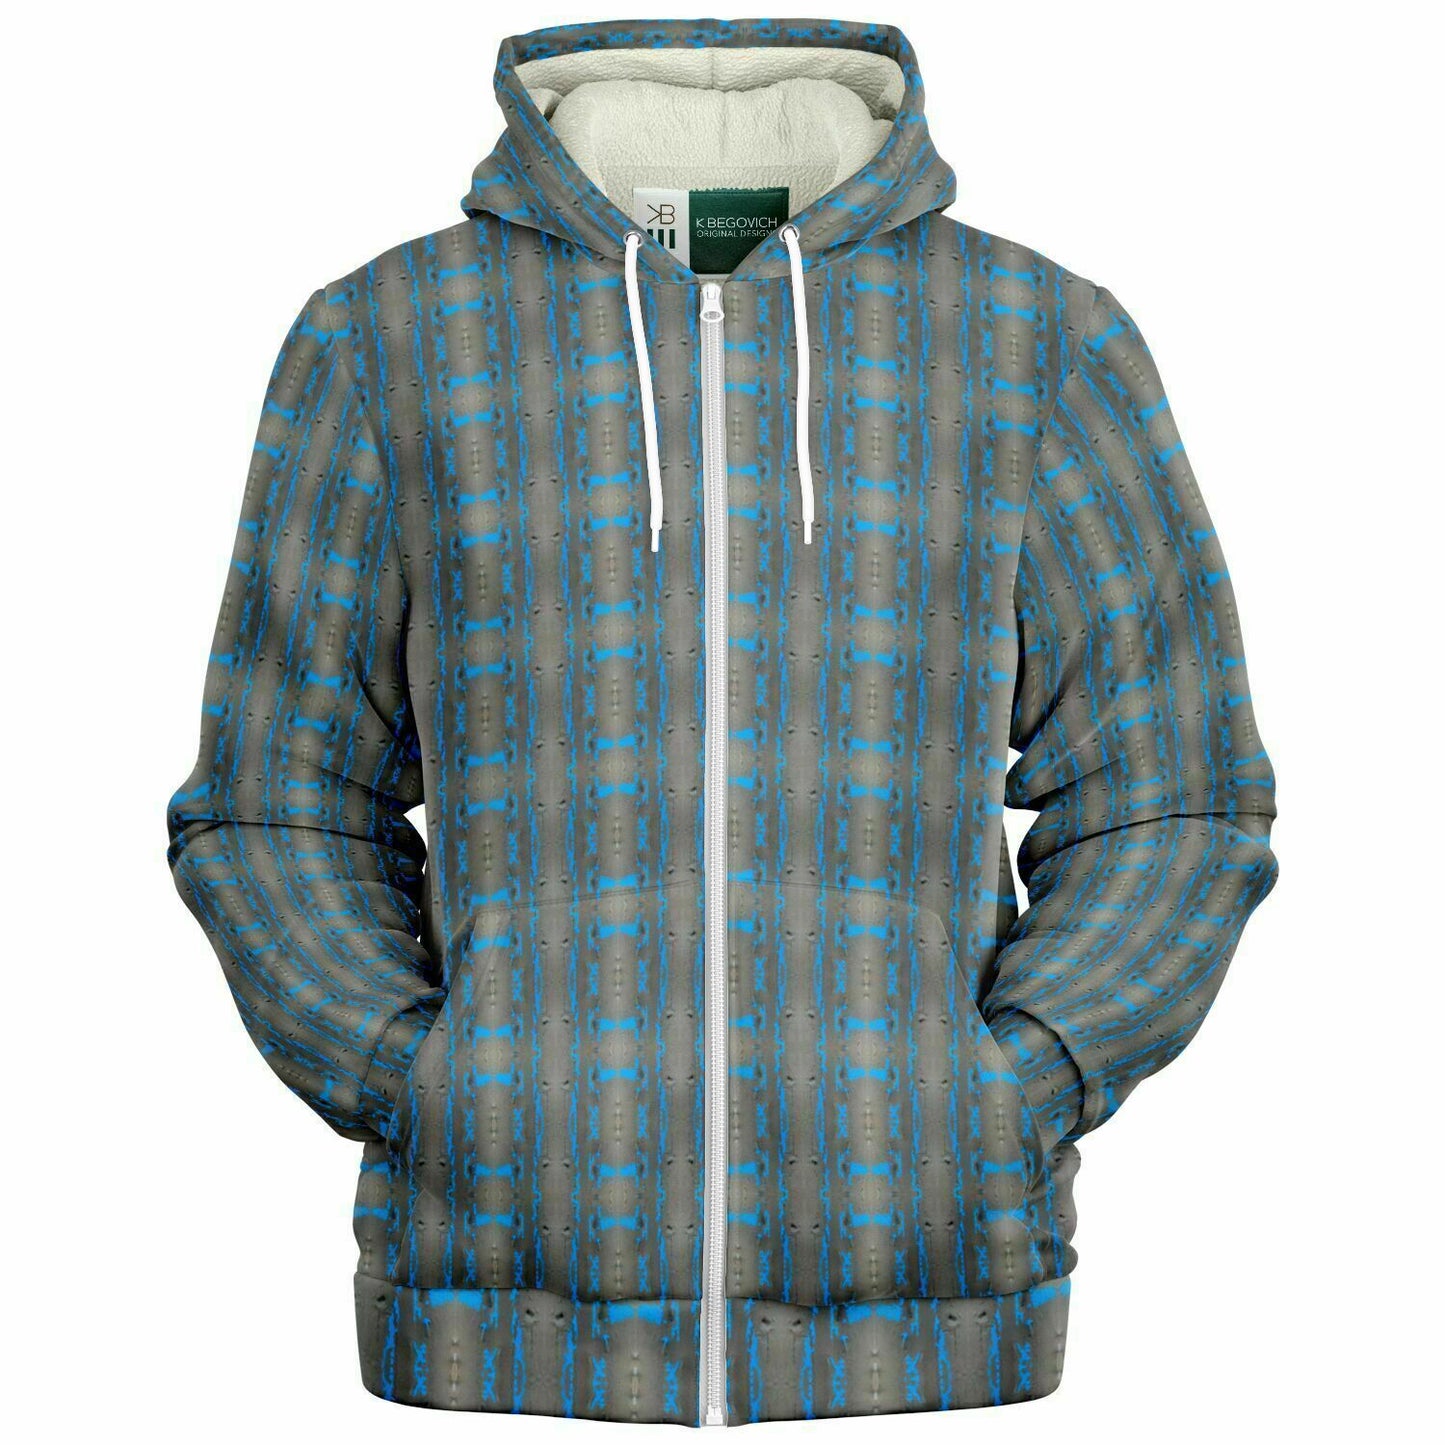 Lined Zip Hoodie (Turquoise No. 2)